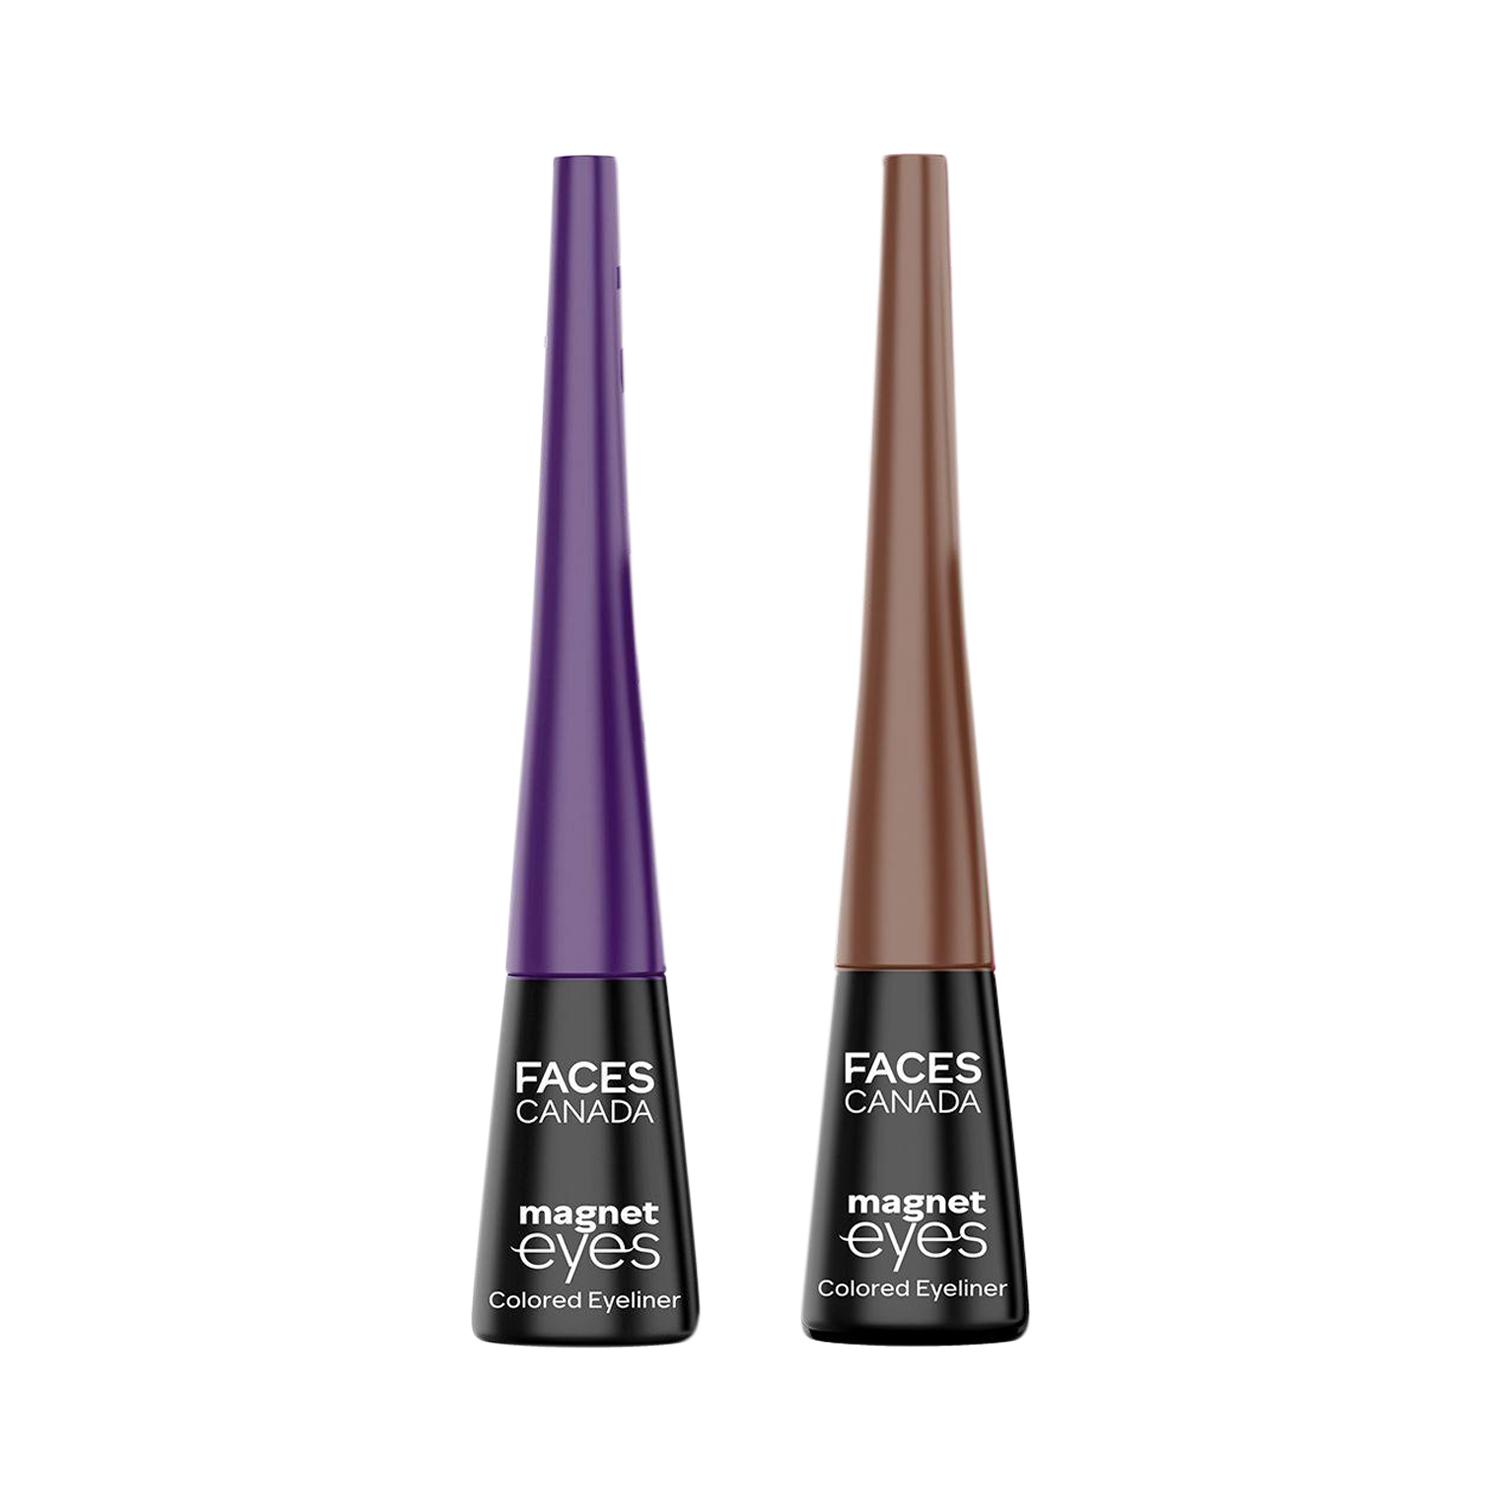 Faces Canada | Faces Canada Magneteyes Color Eyeliners Dramatic Purple and Powerful Brown Combo (Pack of 2)